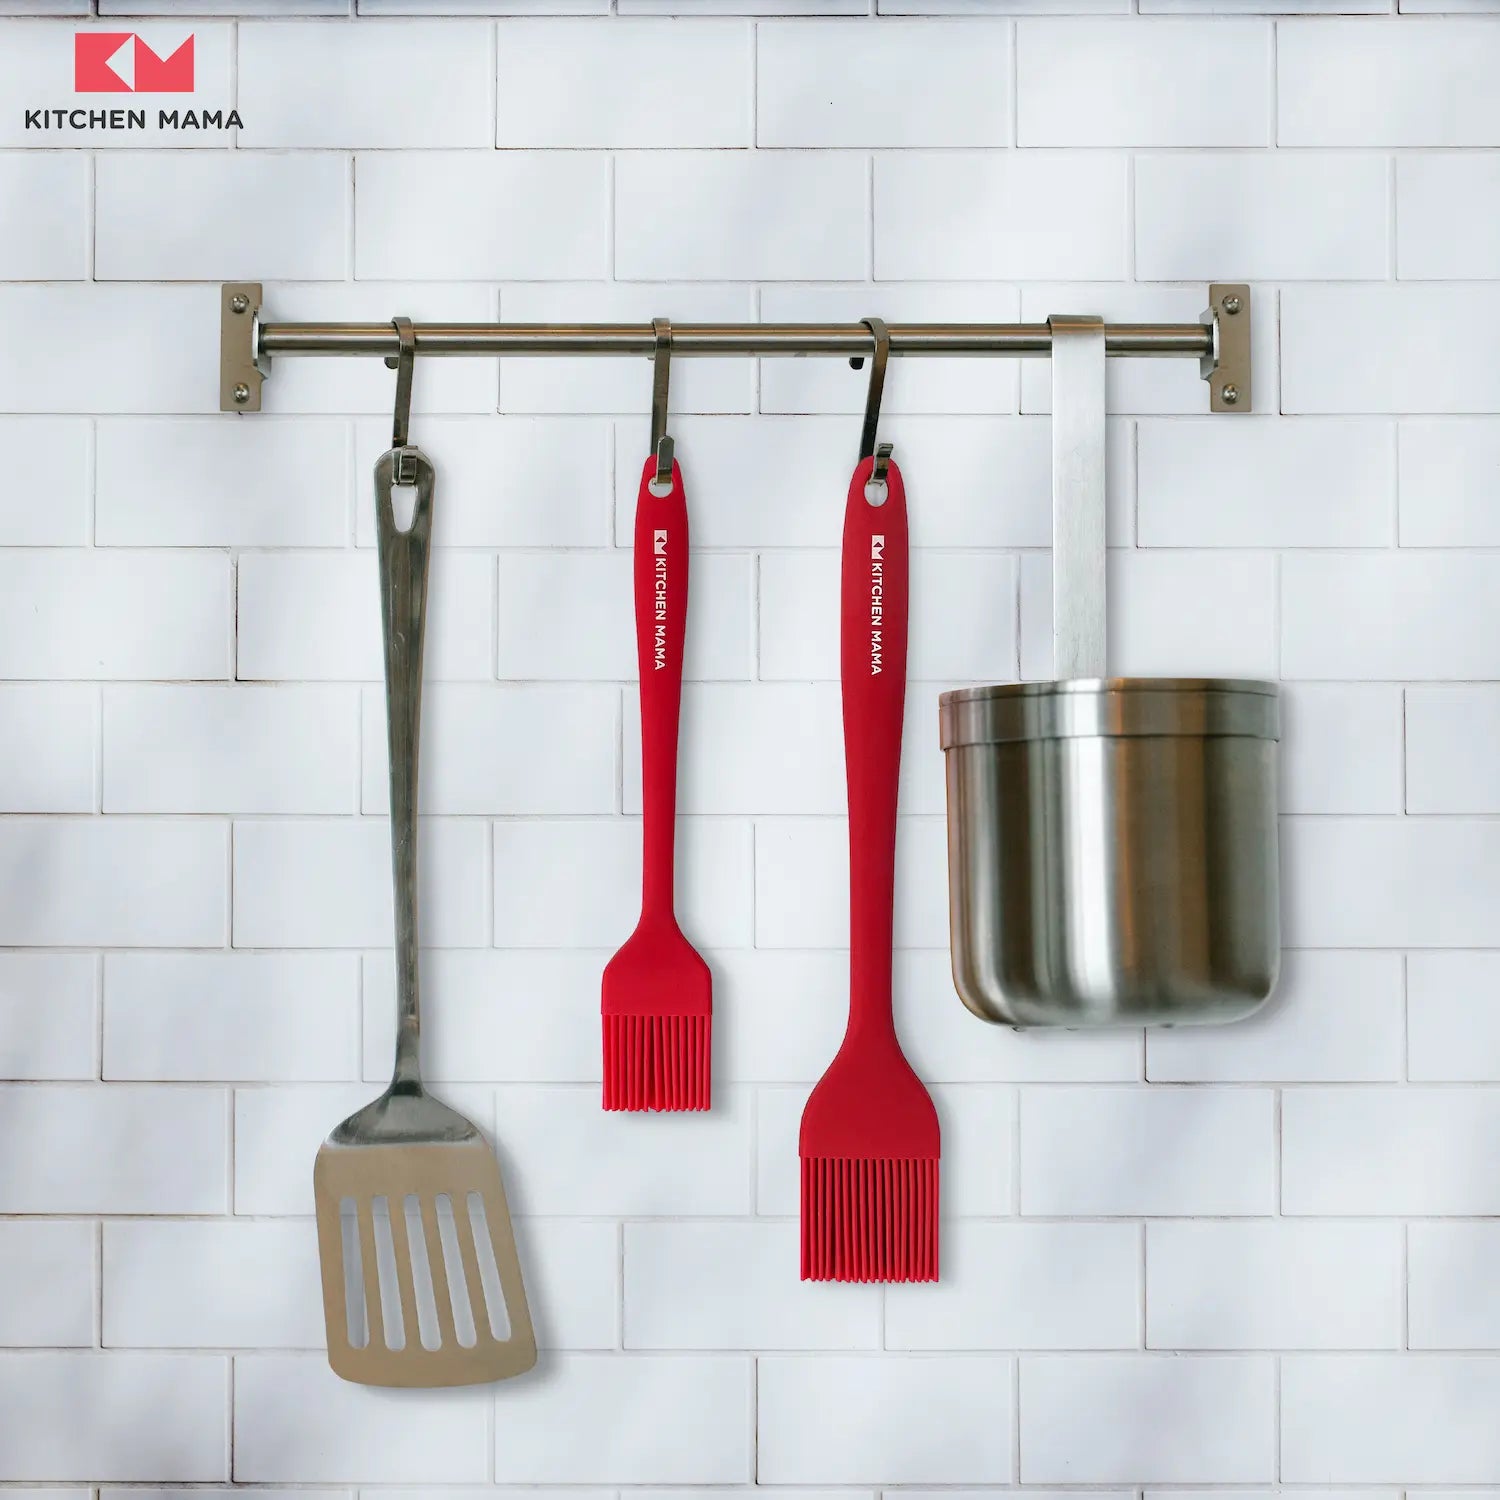 Kitchen Mama Silicone Basting Pastry Brush (A Set of 2), Red, SP0120-R, hang on the wall